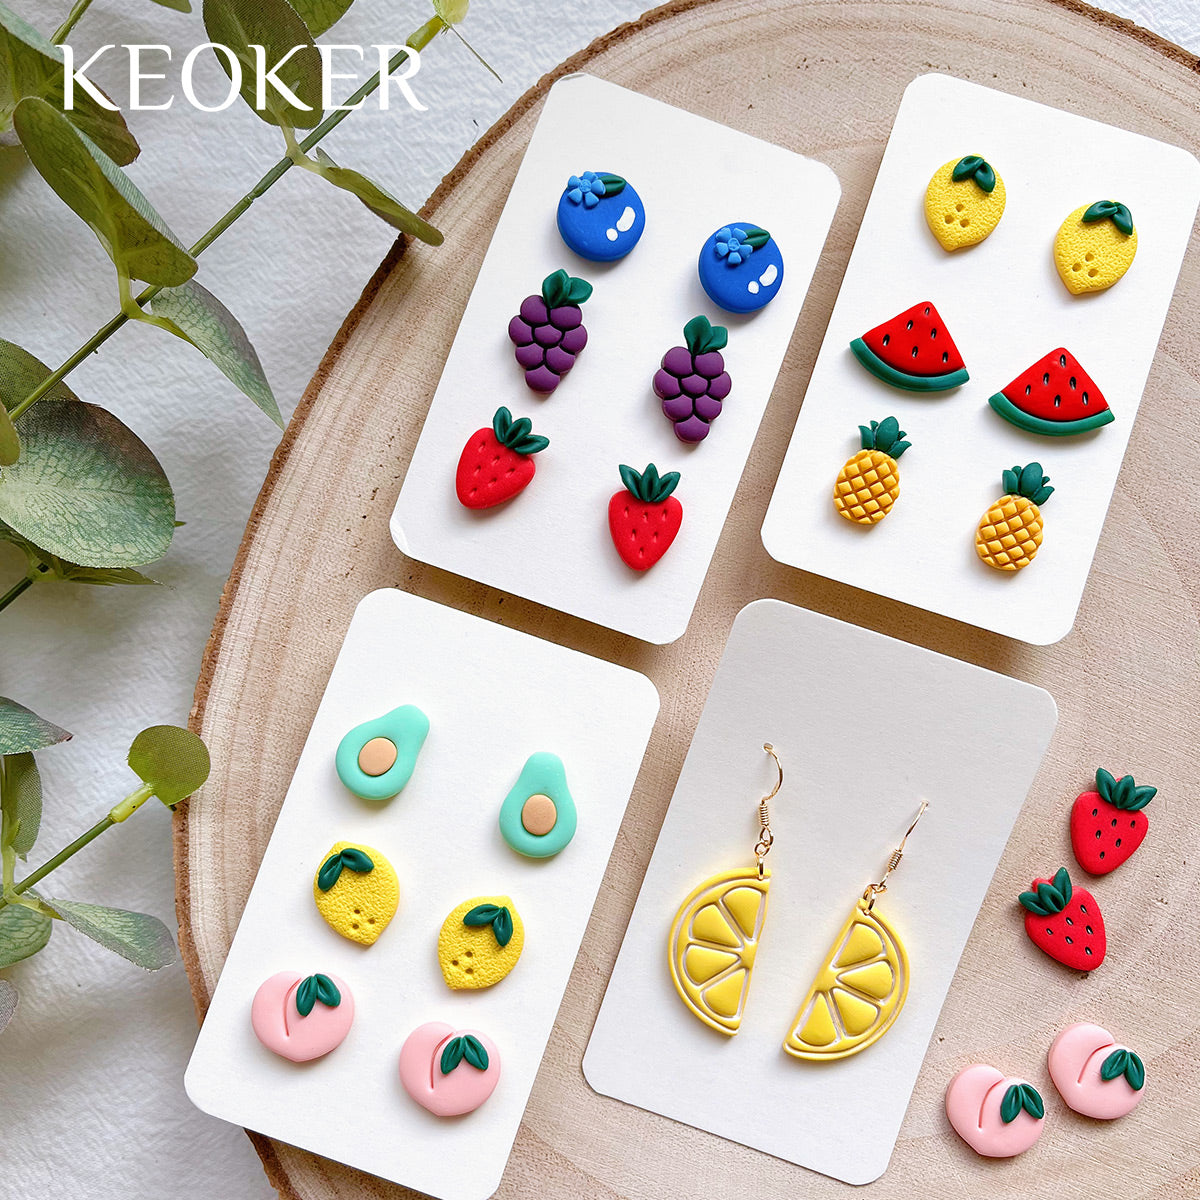 KEOKER Valentines Day Clay Cutters (10 Shapes Earrings)